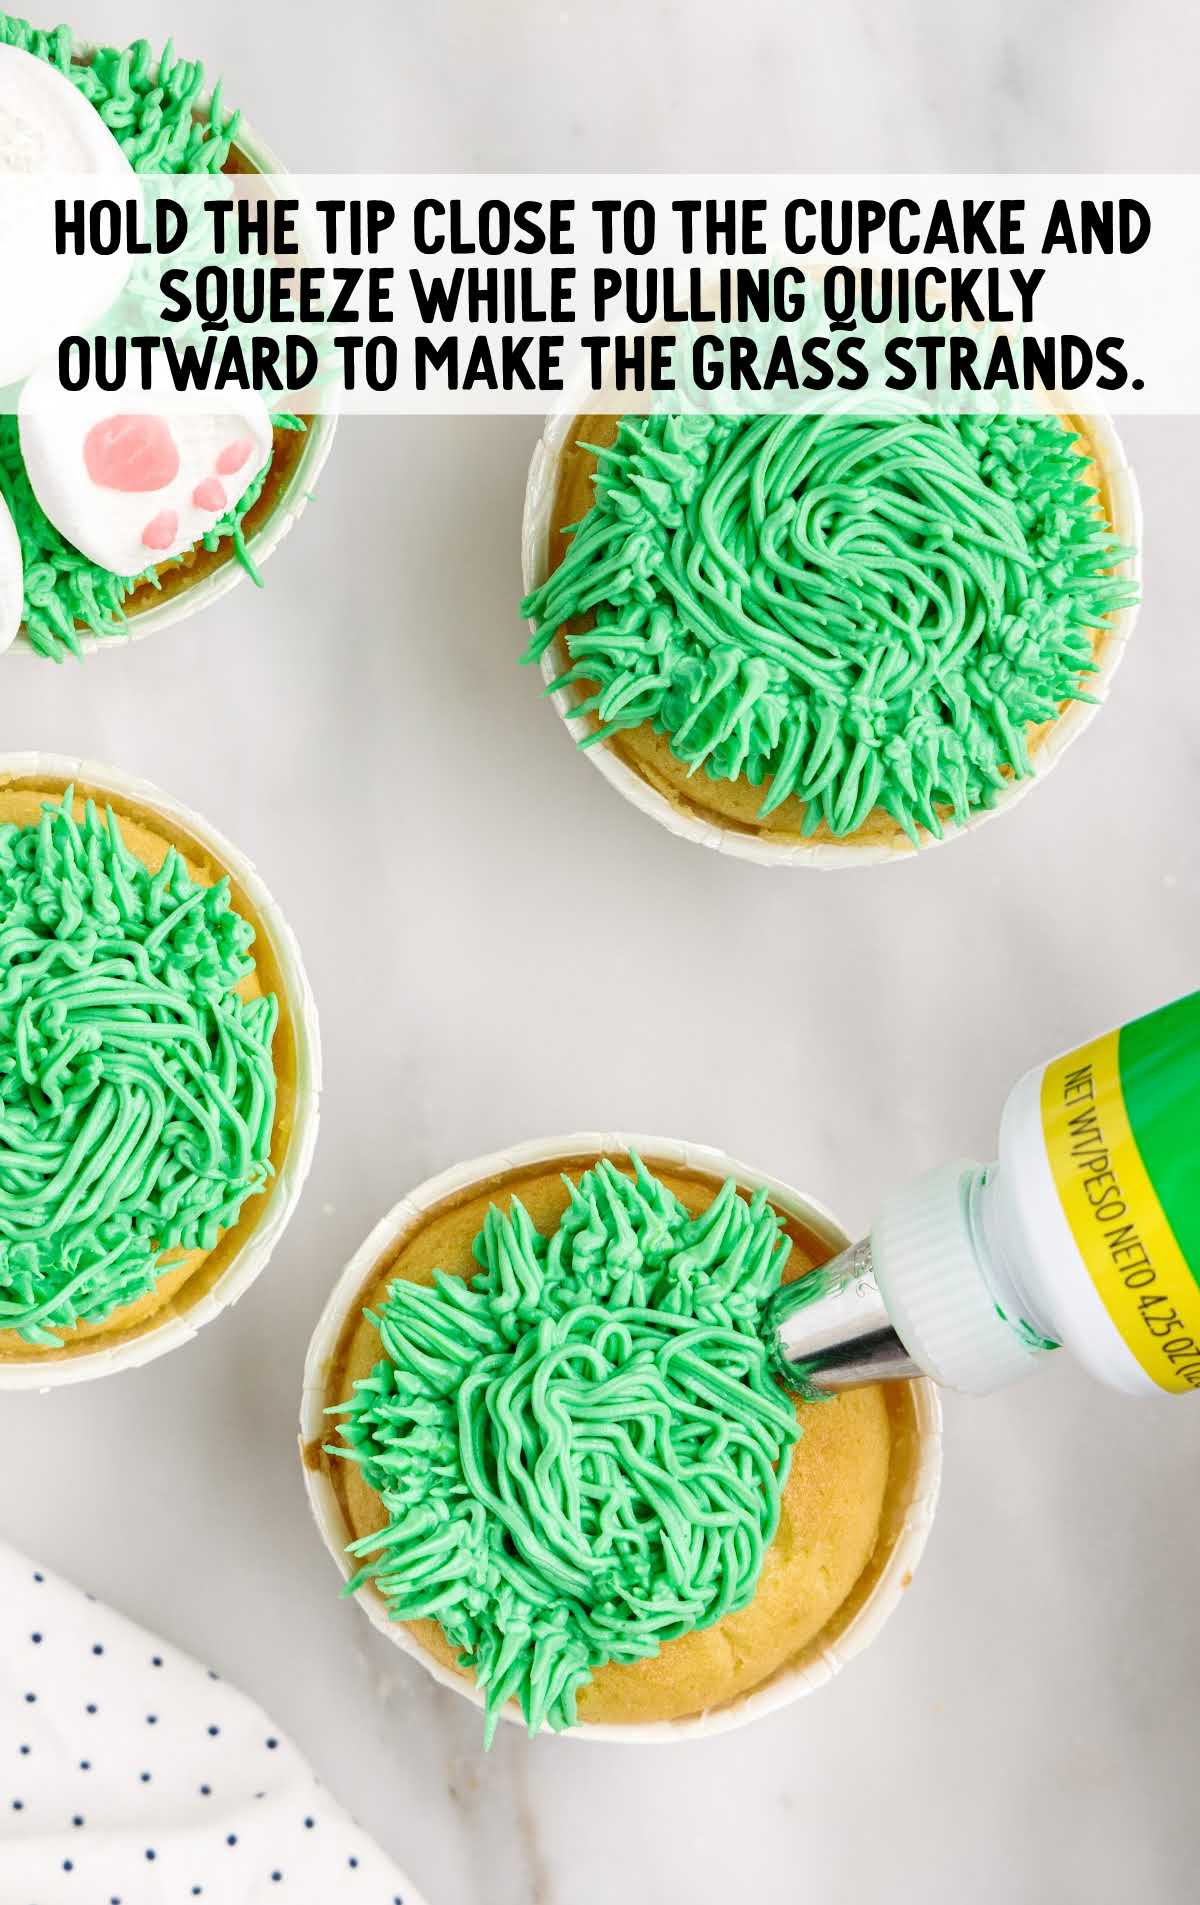 cupcakes decorated with frosting to resemble grass